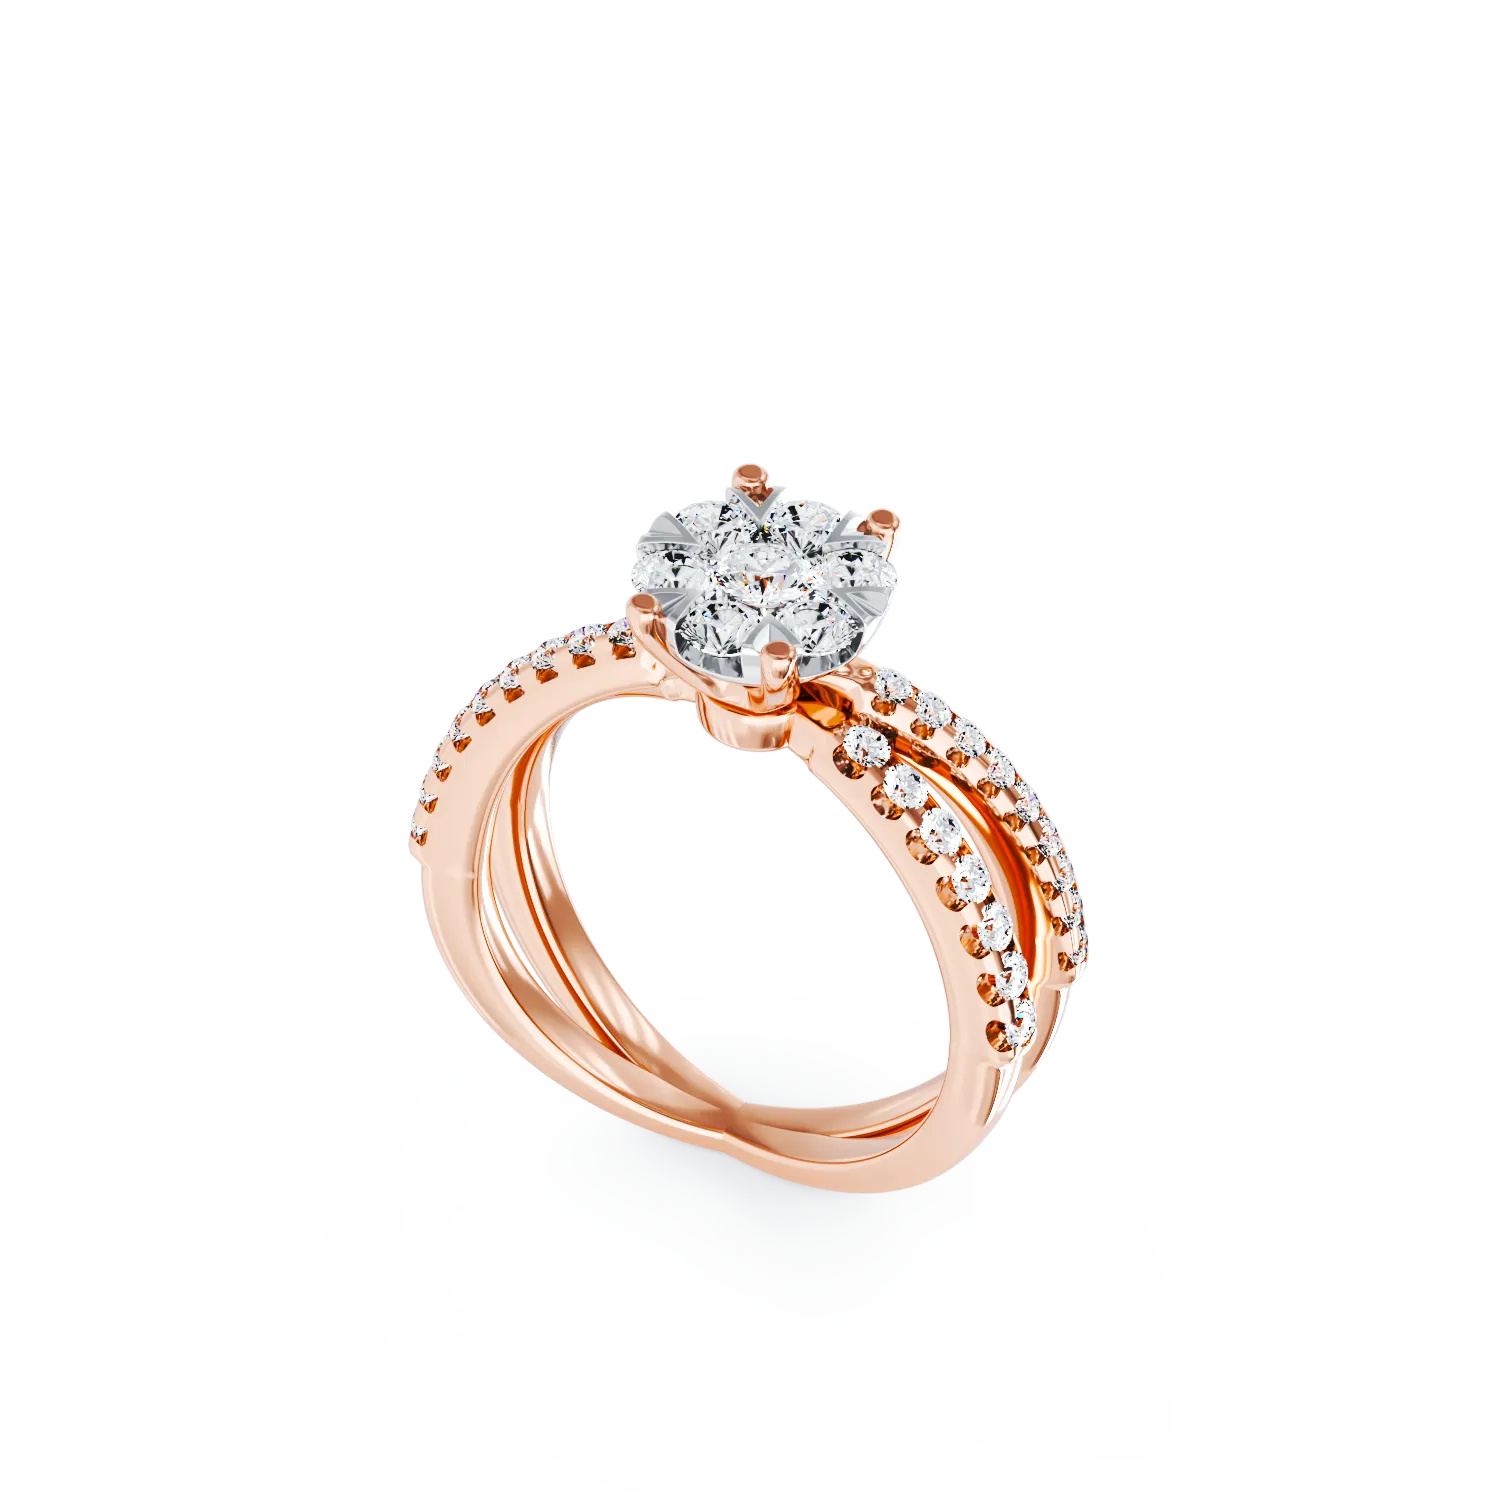 18k rose gold engagement ring with a 0.6ct diamond